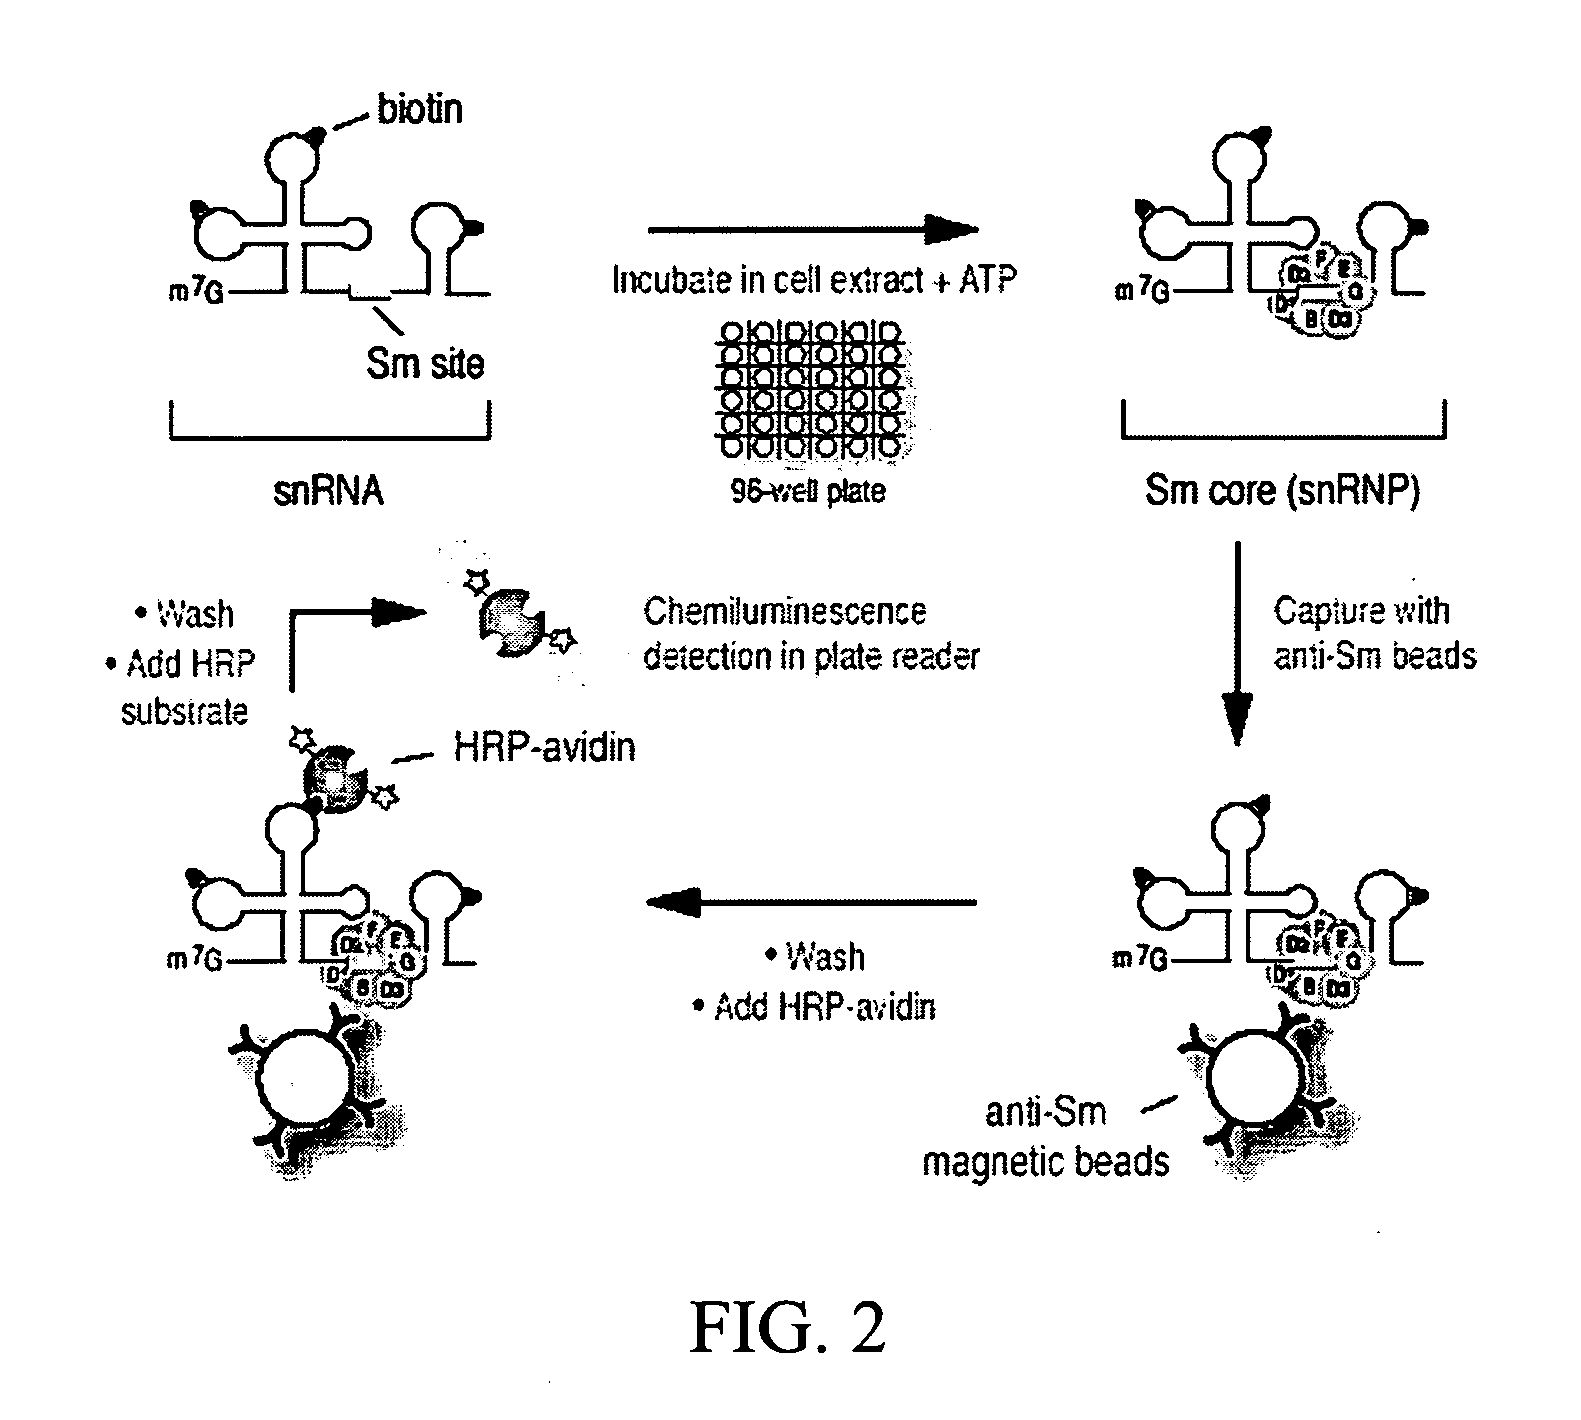 Assays, methods and kits for detecting small nuclear ribonucleoprotein particle assembly and survival of motor neurons activity